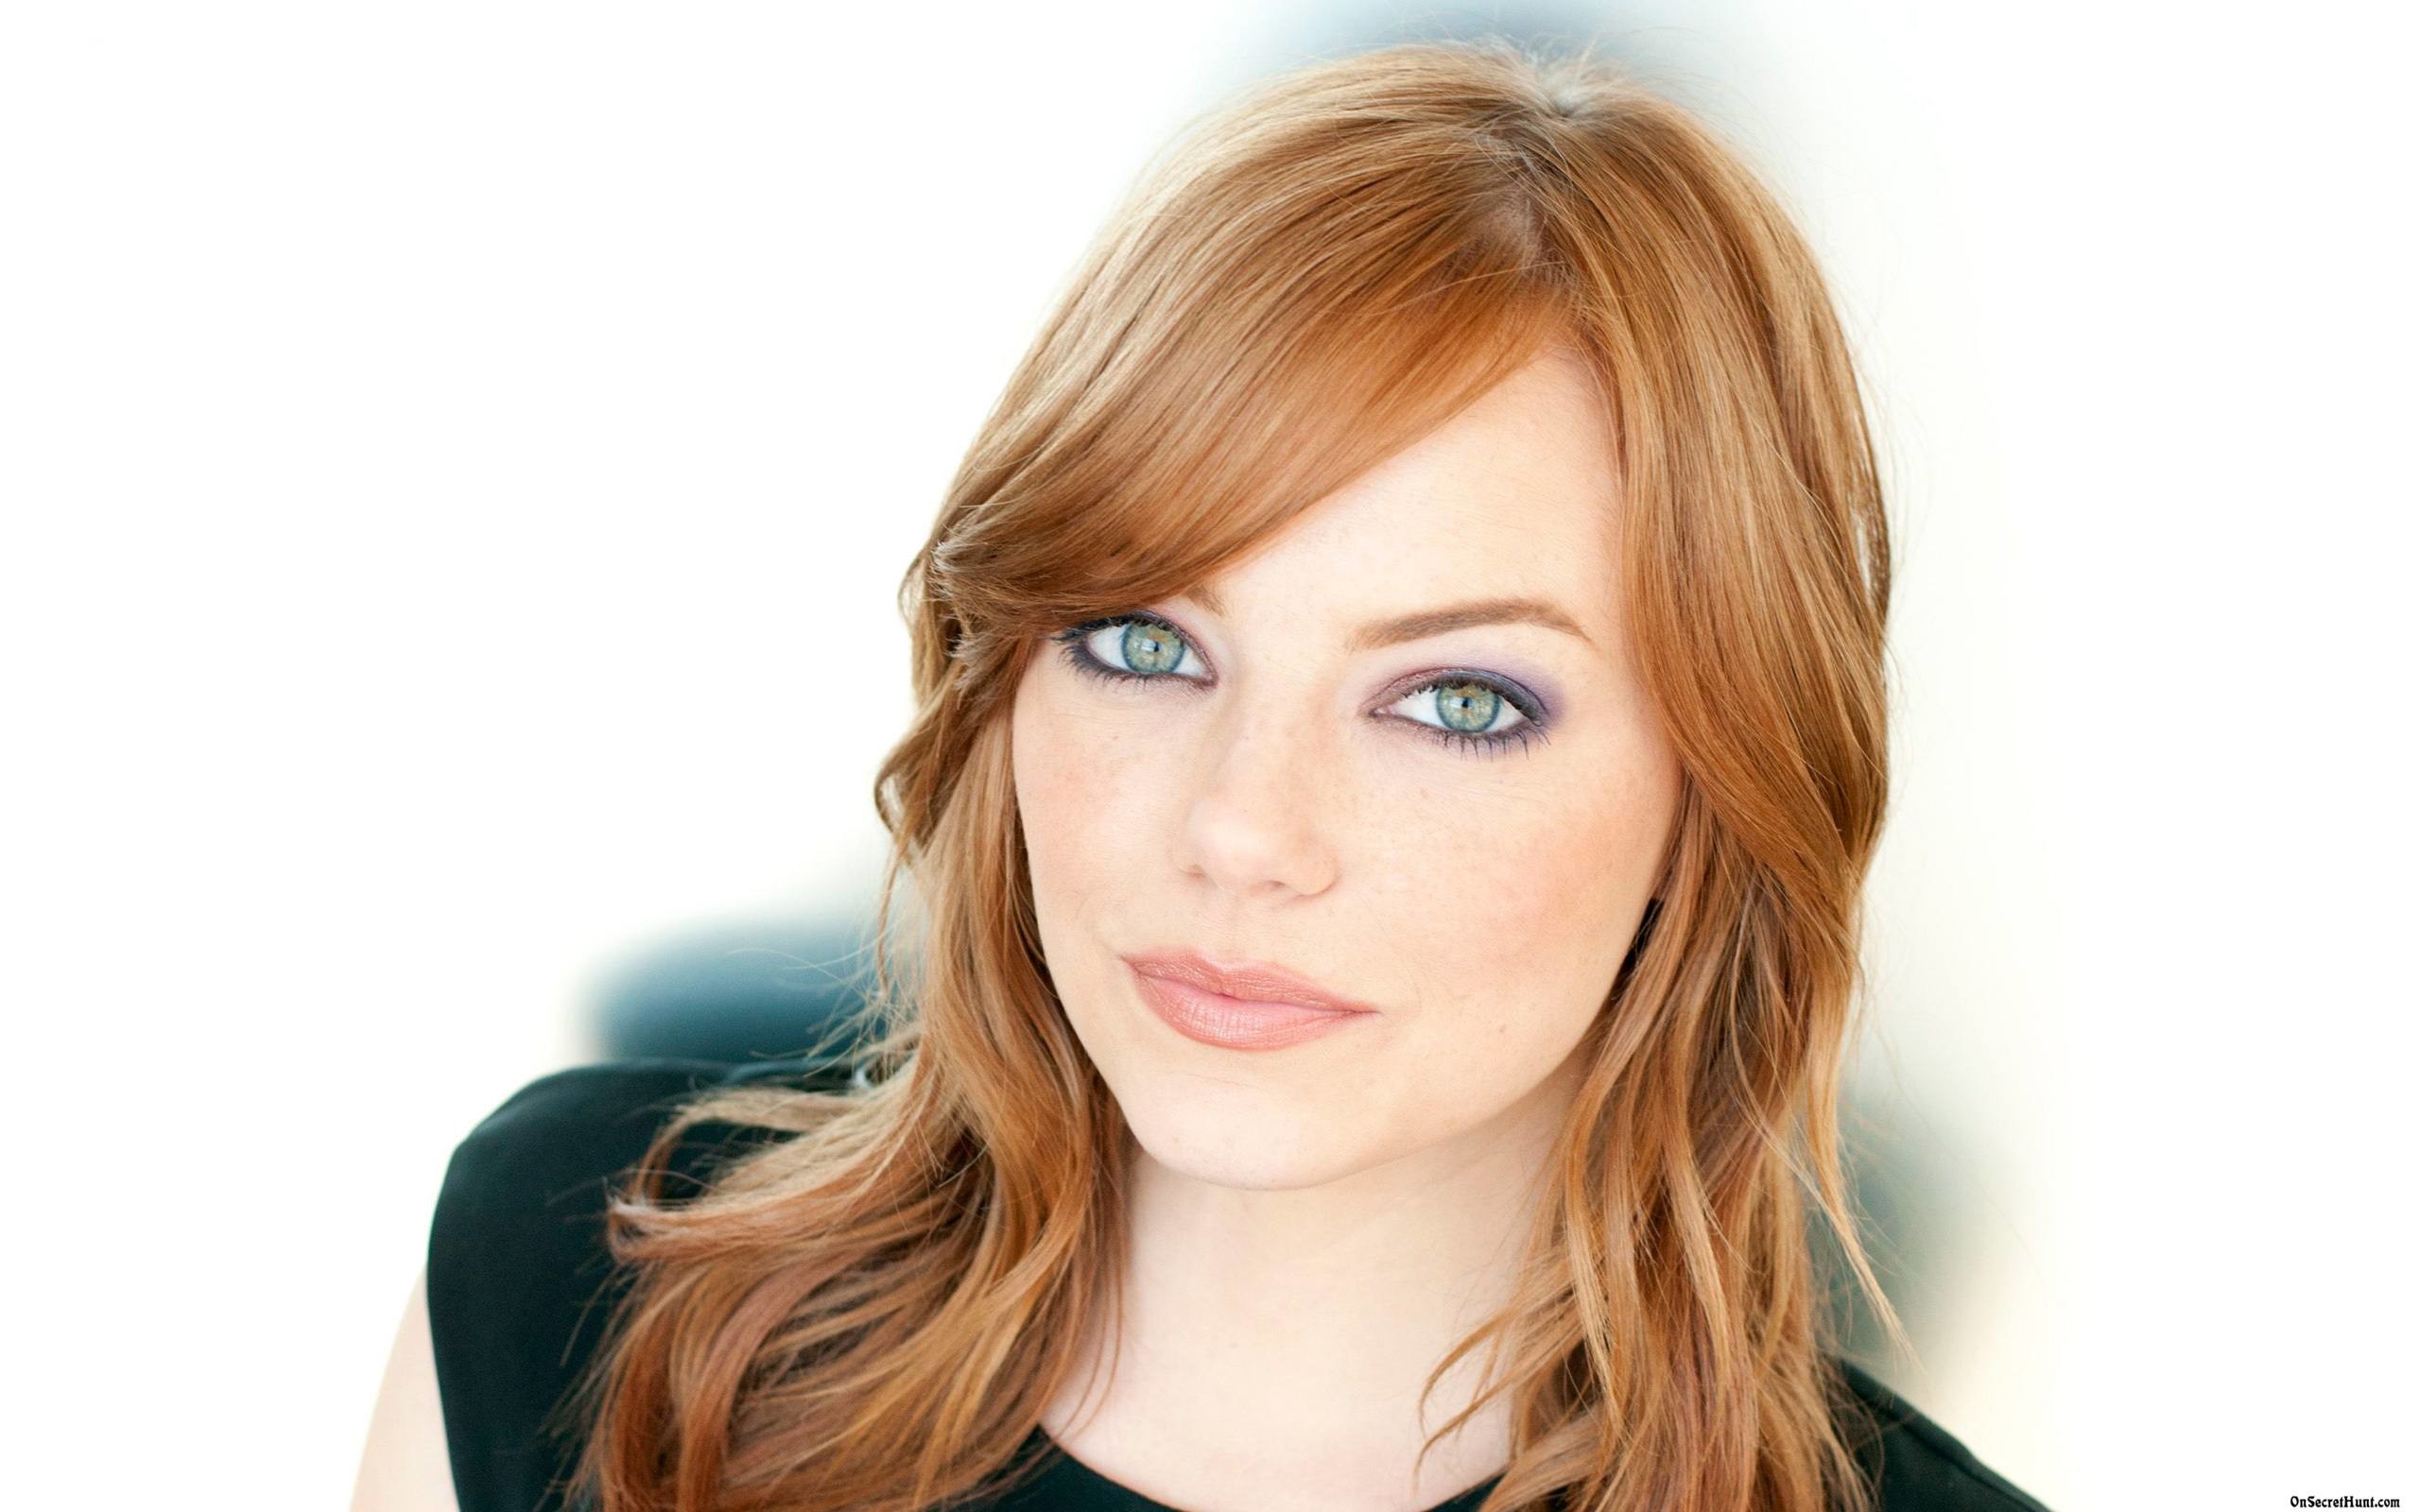 Emma Stone Wallpapers Gallery Emma Stone Wallpapers